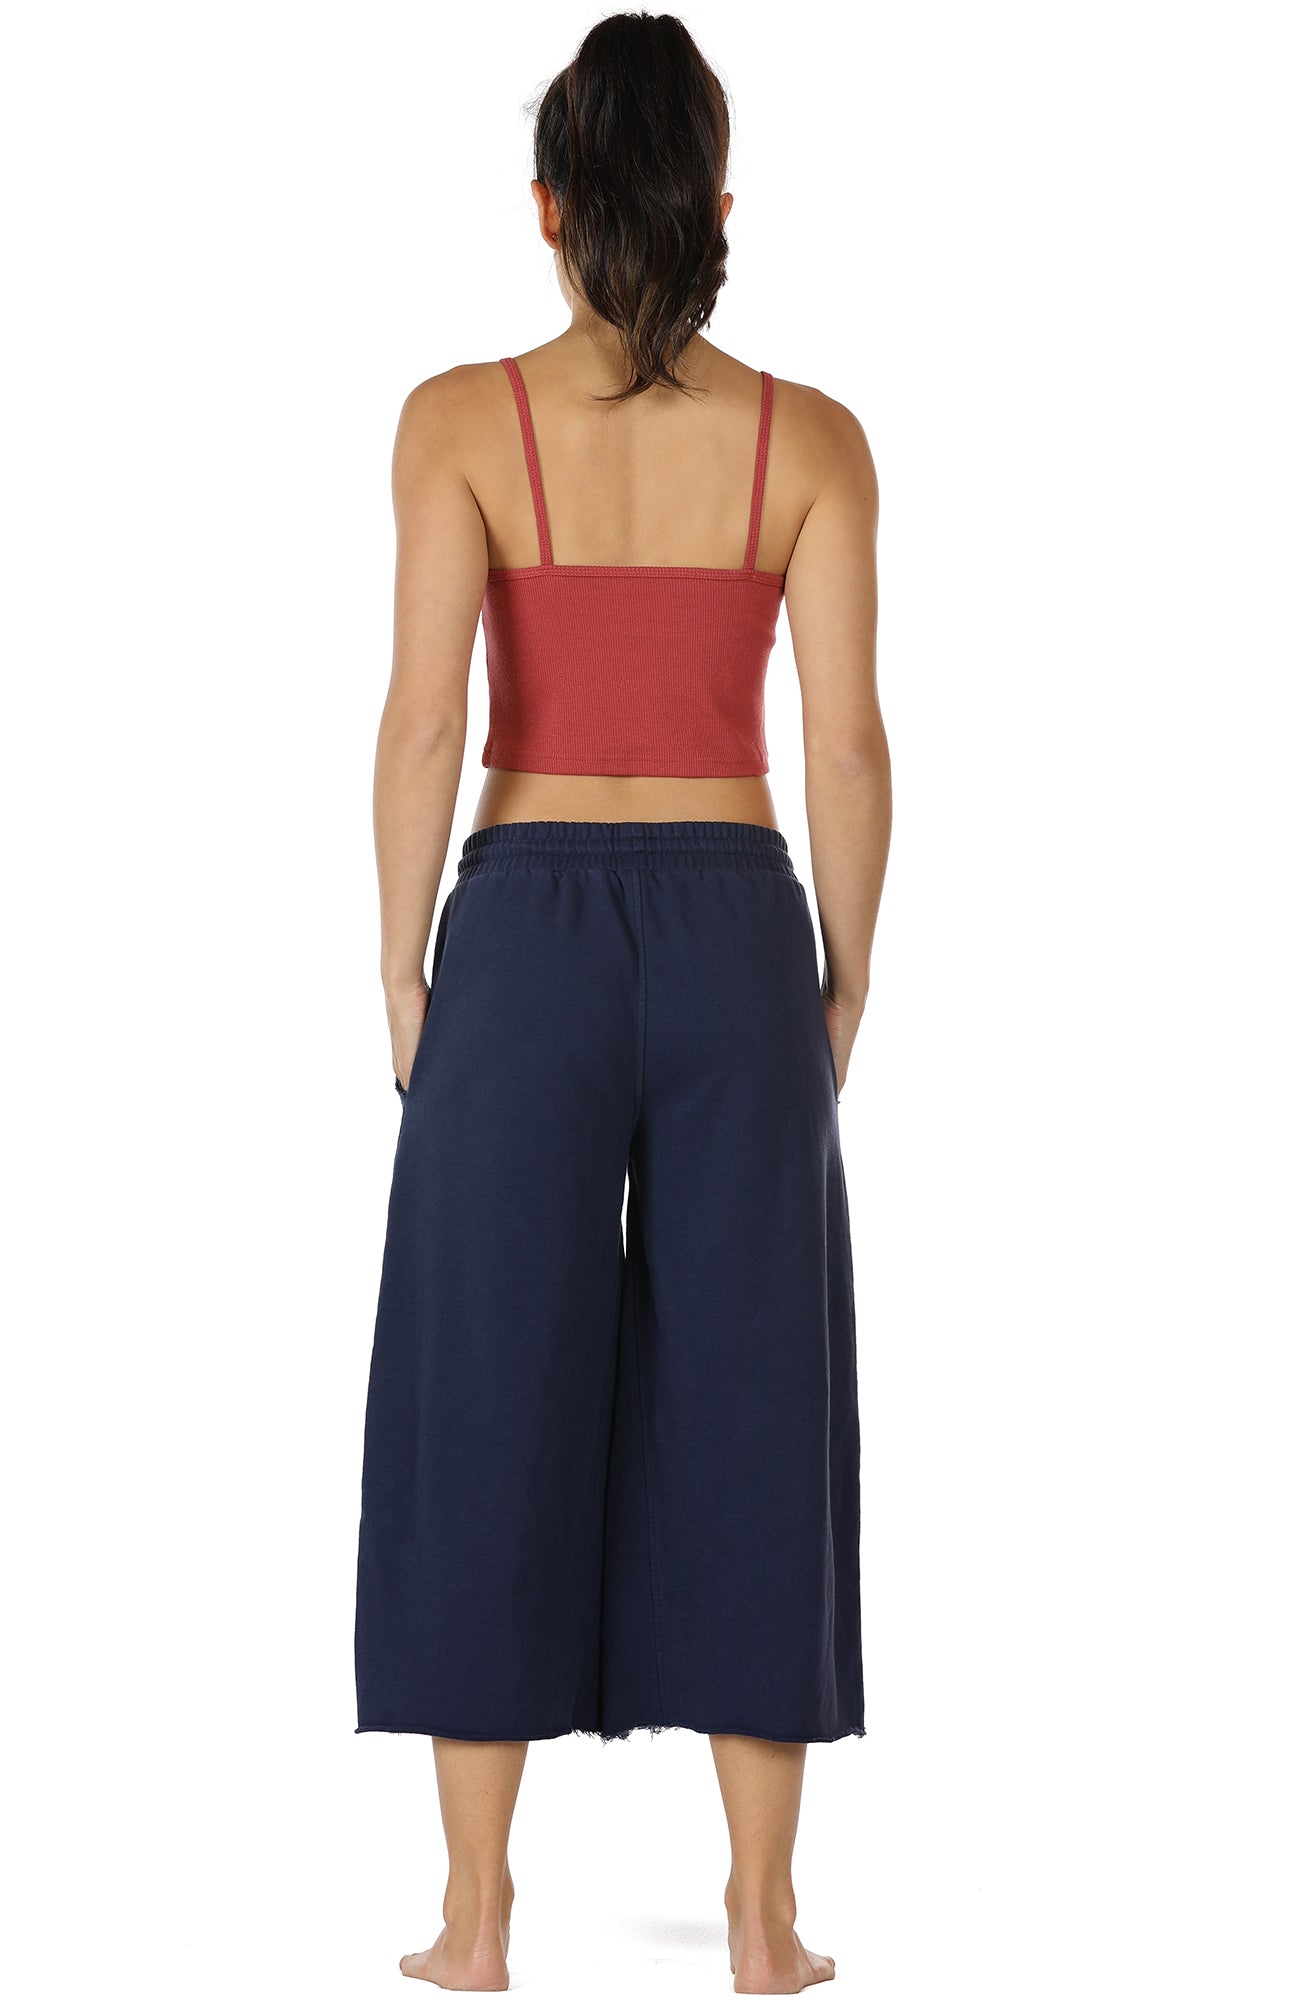 Make Your Own Airspace Women's Spaghetti Strap Crop Top